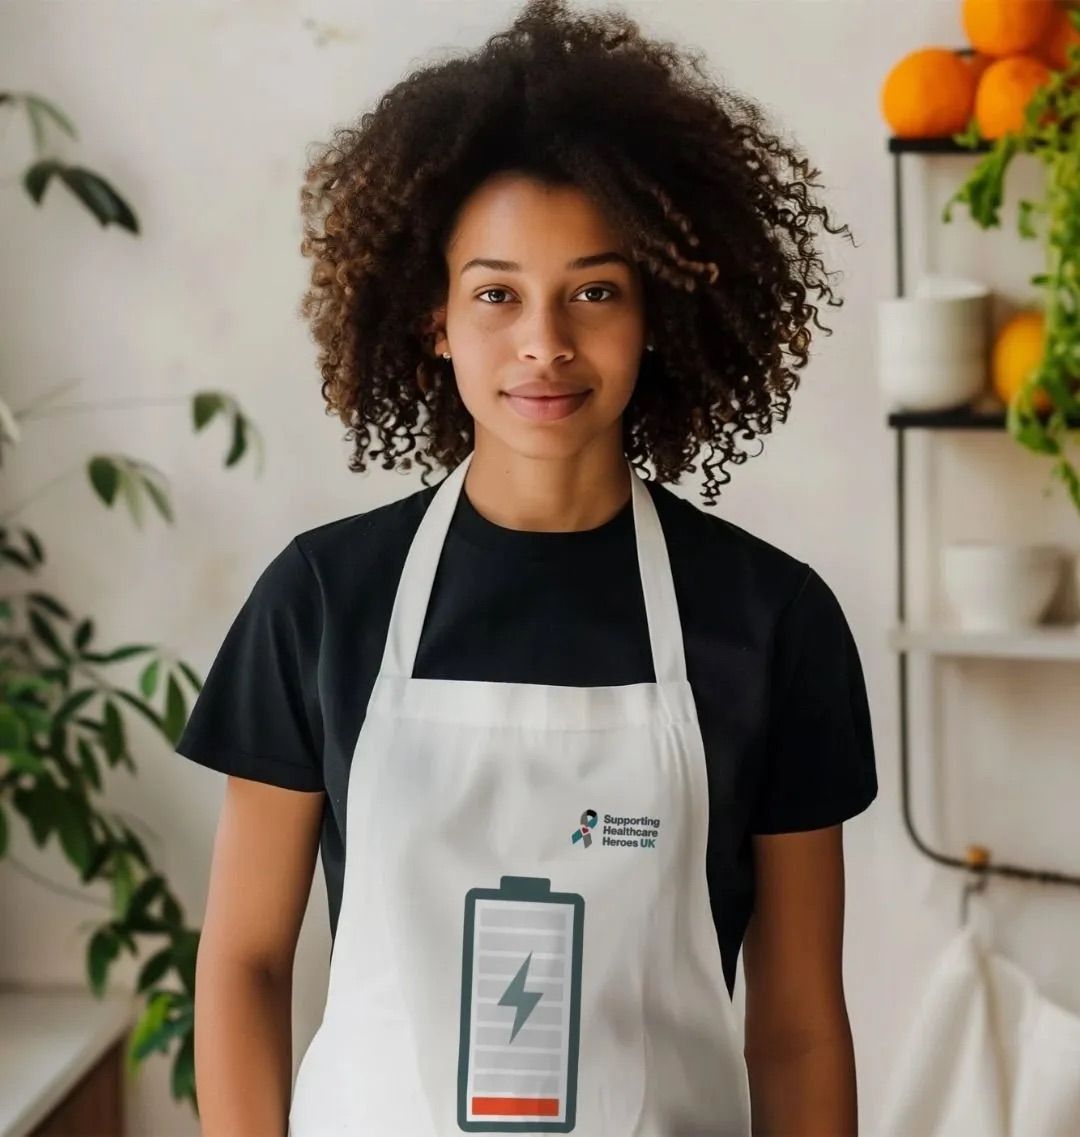 Our shop is now live and waiting for a visit from you! We have a range of goods including clothing, stationery, and household goods all designed with sustainability in mind and a series of different designs. Find out more at: shh-uk.org/shop
#CareForThoseWhoCared